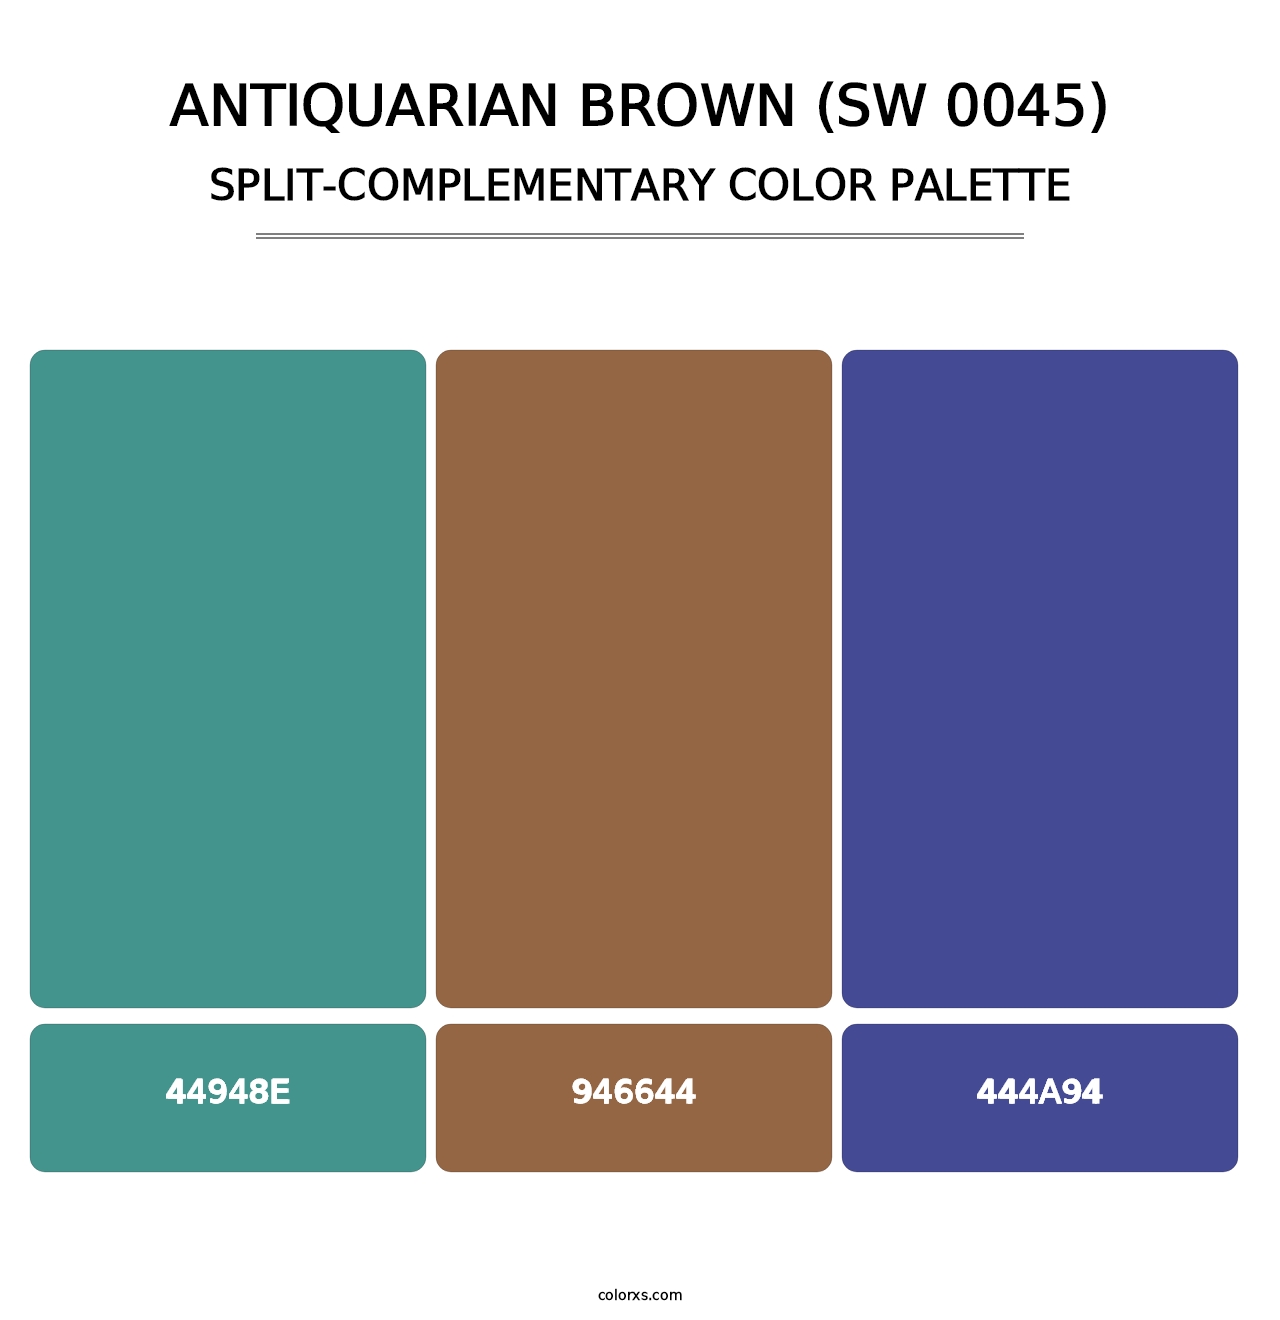 Antiquarian Brown (SW 0045) - Split-Complementary Color Palette